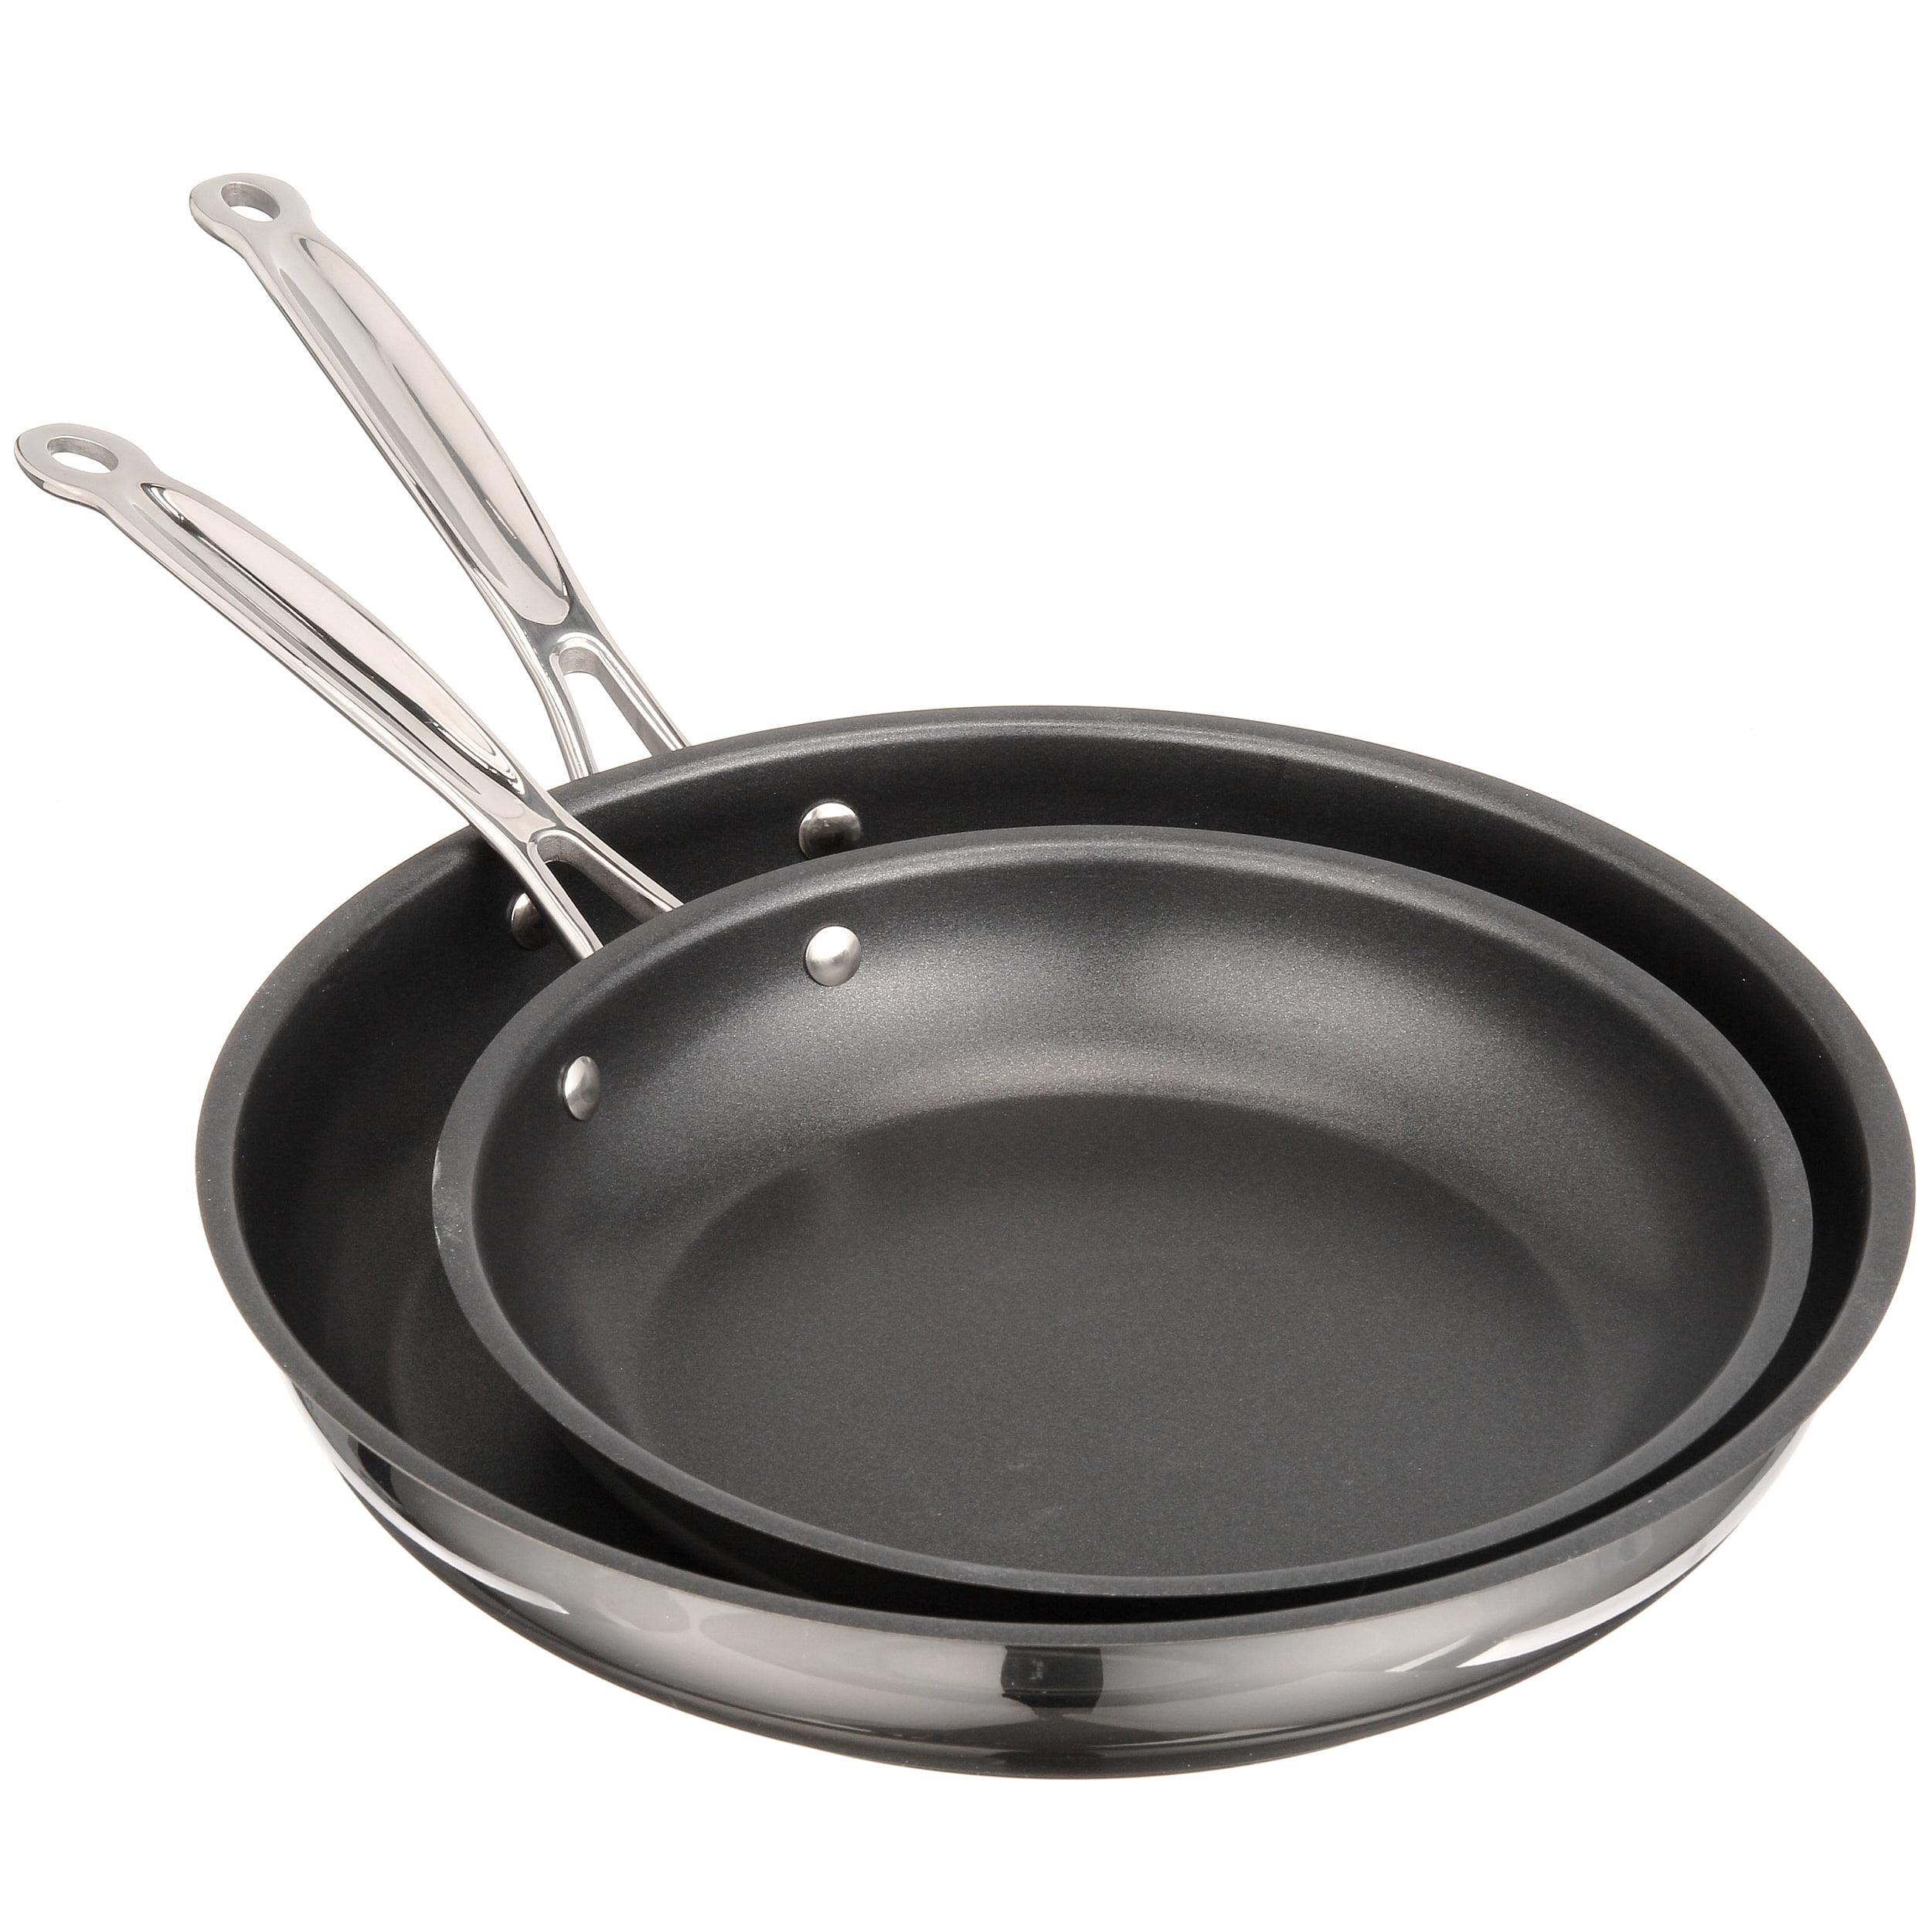  Cuisinart Chef's Classic Stainless Nonstick 2-Piece 9-Inch and  11-Inch Skillet Set - Black And Silver: Cuisinart Cookware: Home & Kitchen